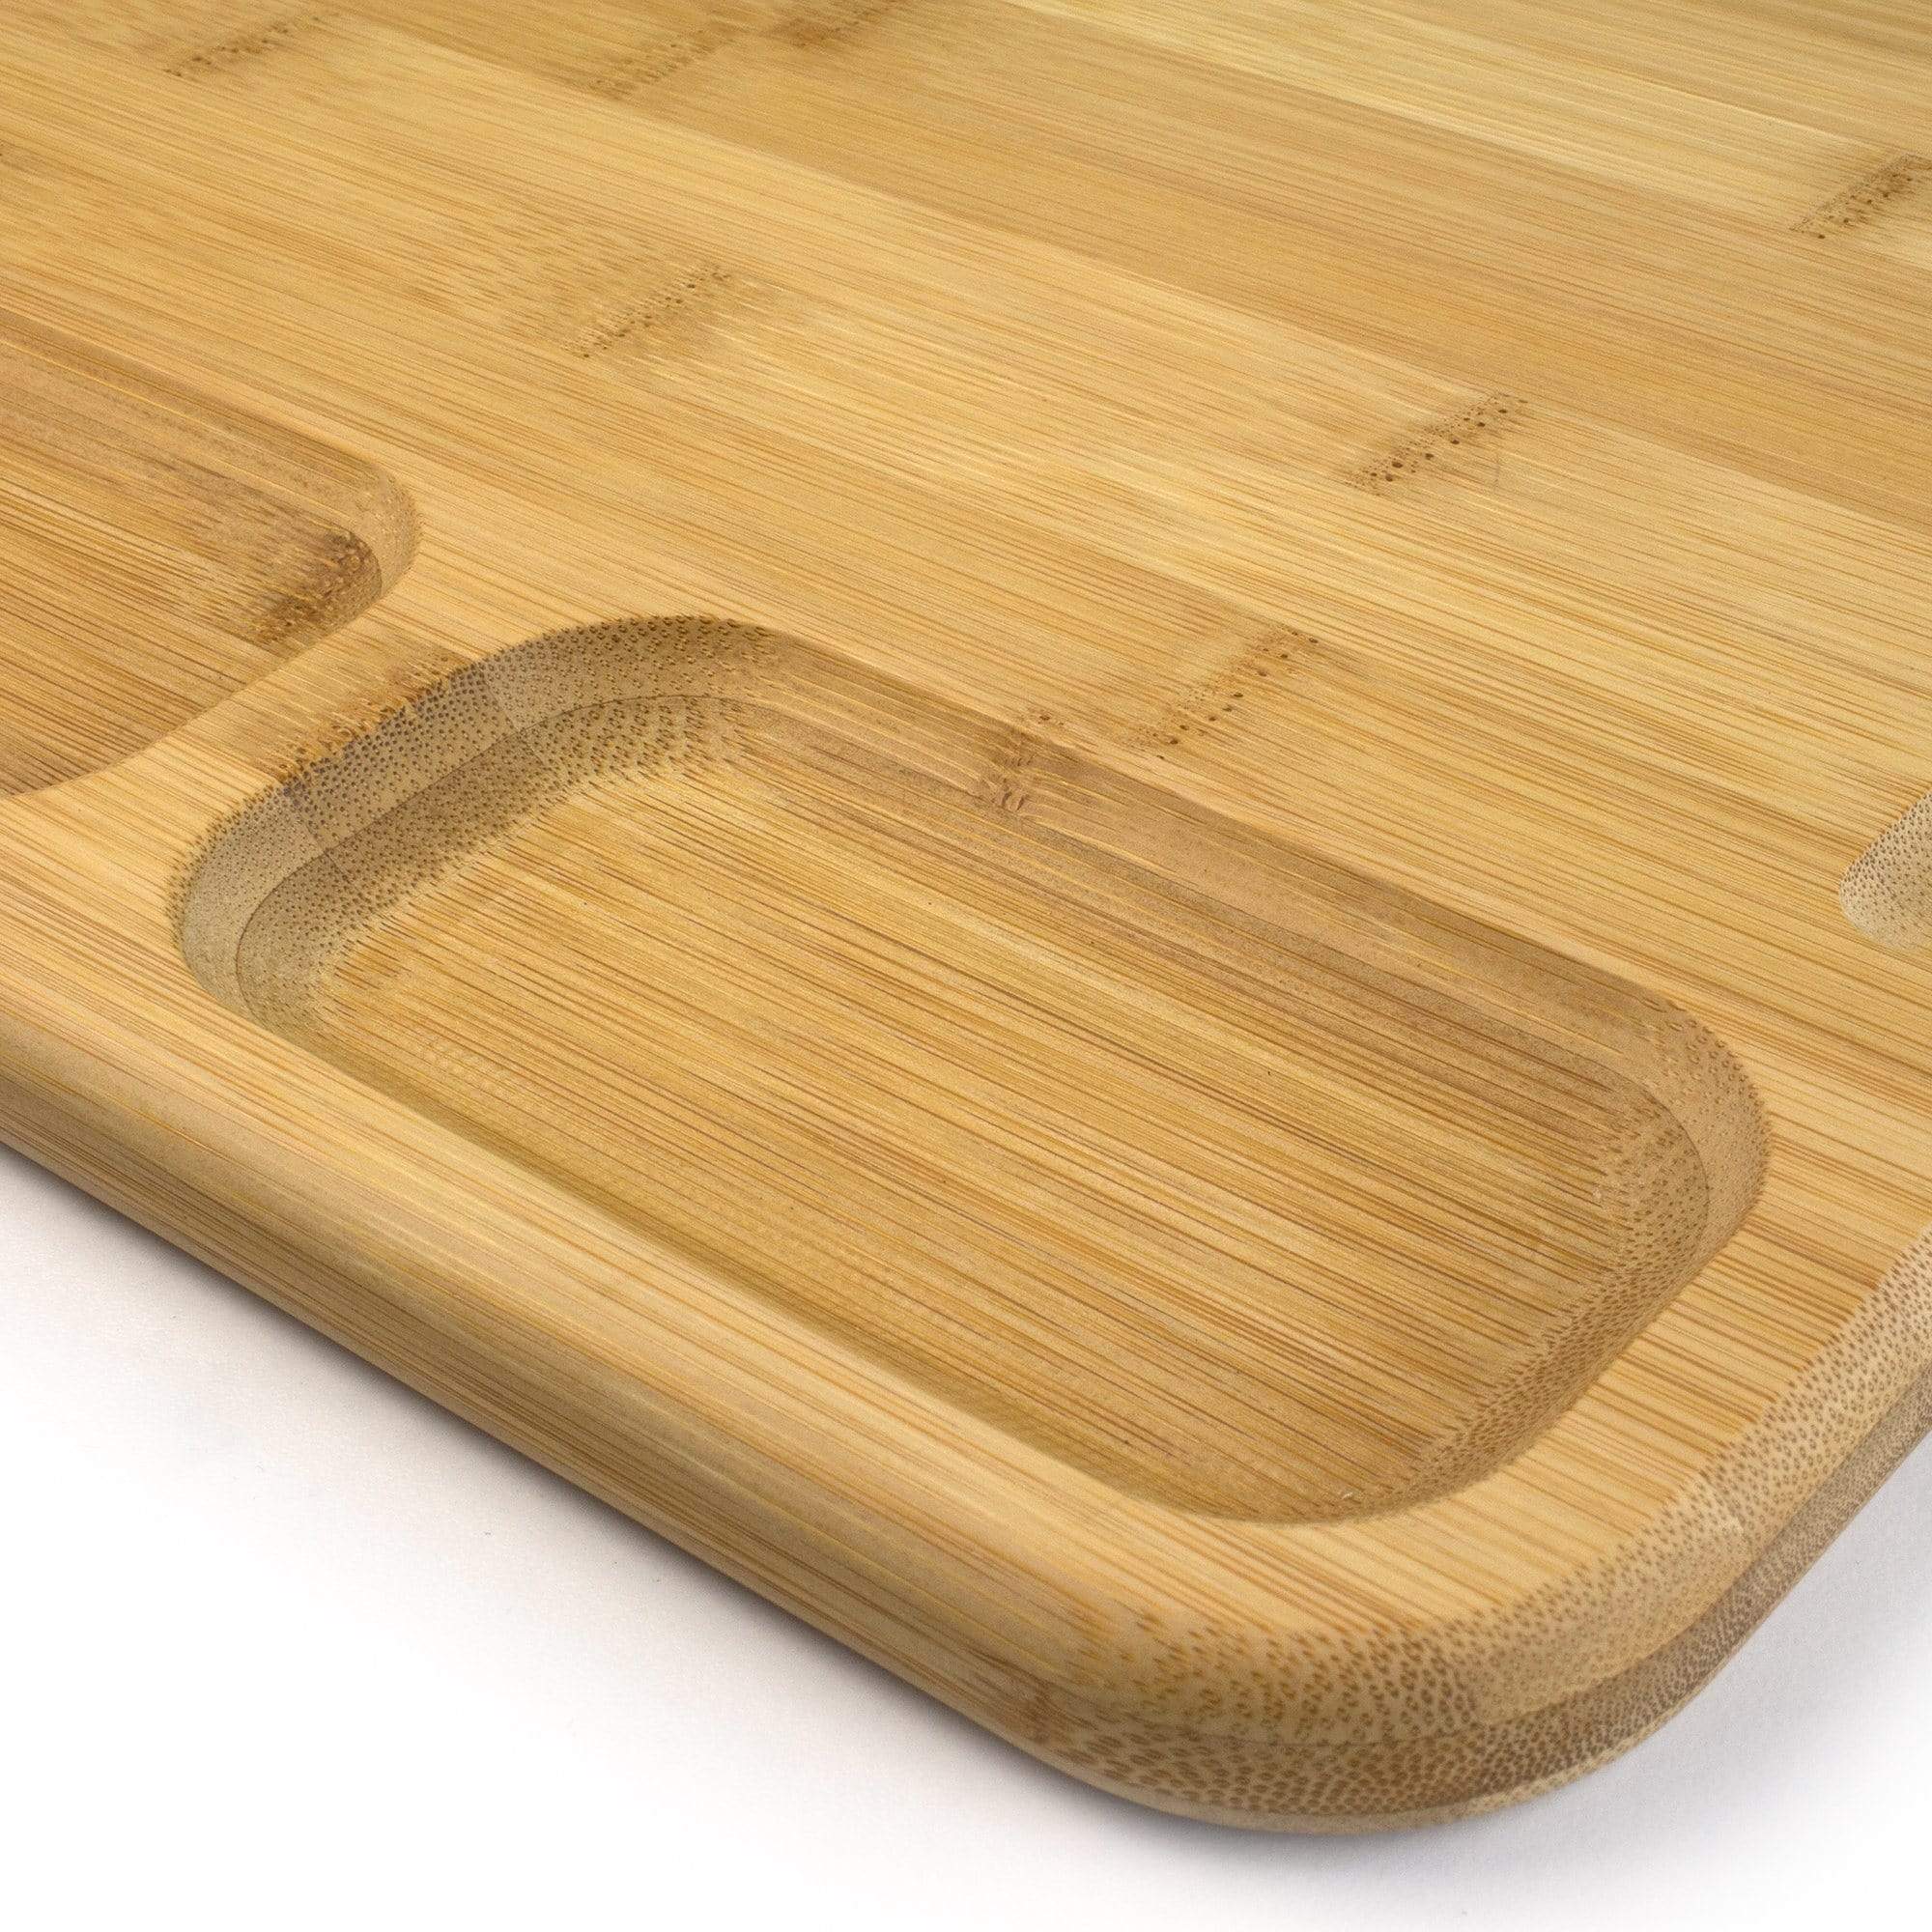 https://totallybamboo.com/cdn/shop/products/totally-bamboo-3-well-kitchen-prep-cutting-board-with-juice-groove-17-12-x-13-12-totally-bamboo-921470.jpg?v=1627836662